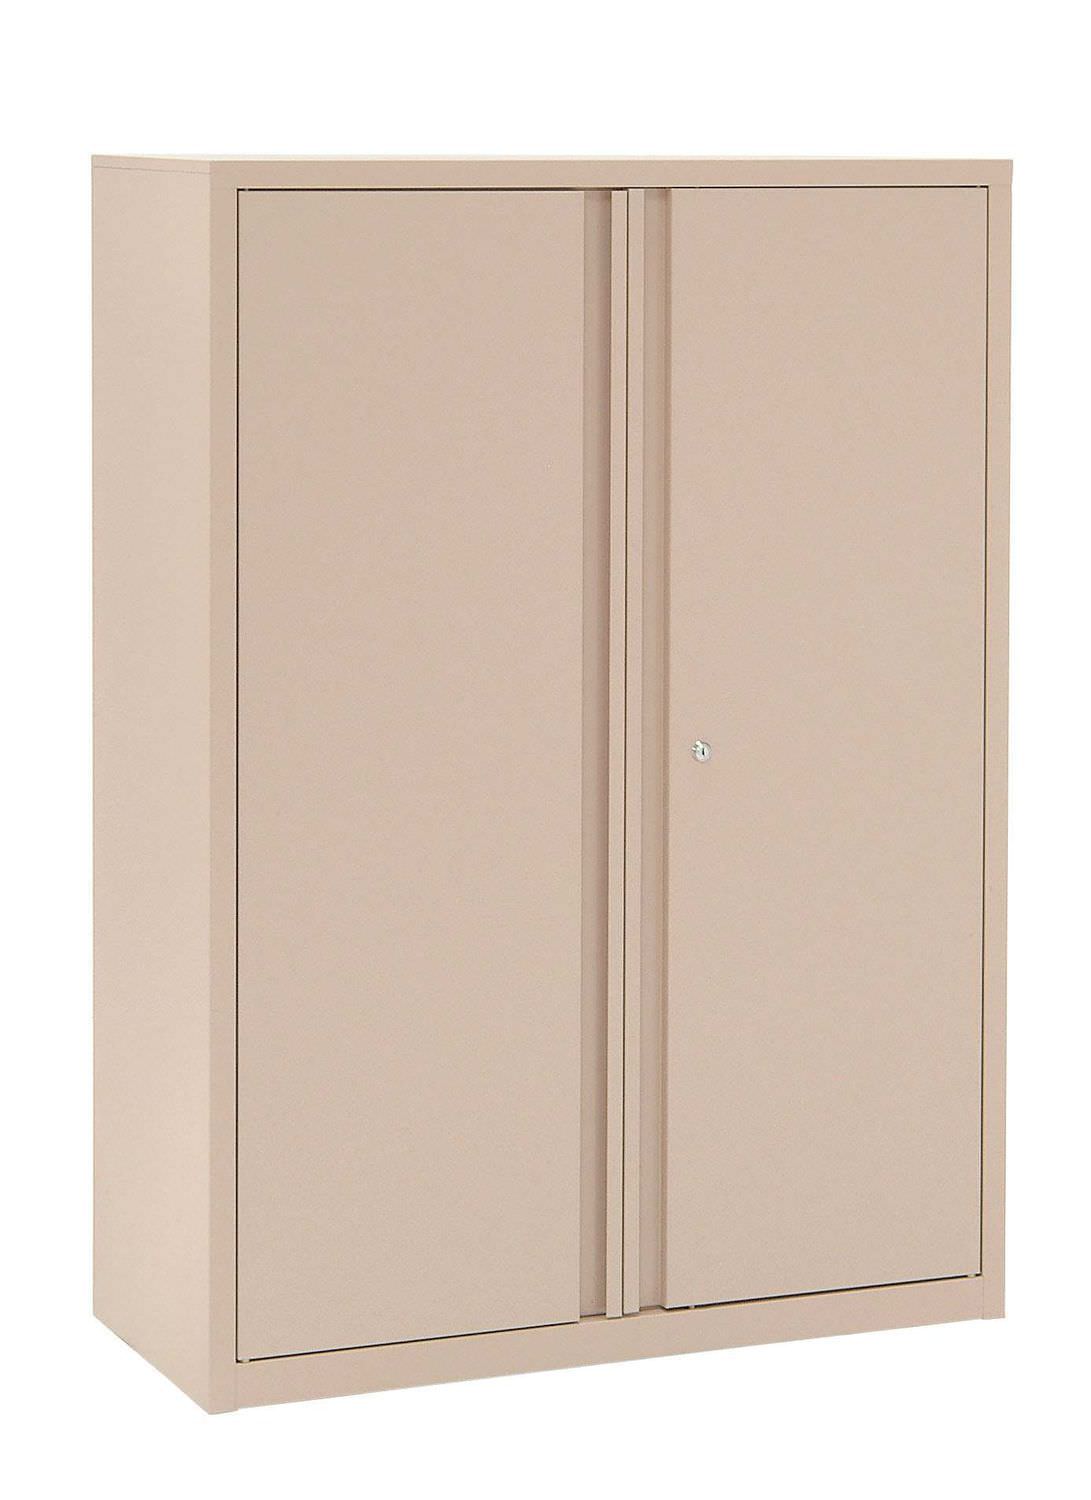 Storage cabinet / mounted for medical records / for healthcare facilities / with shelf 3003 Inmoclinc